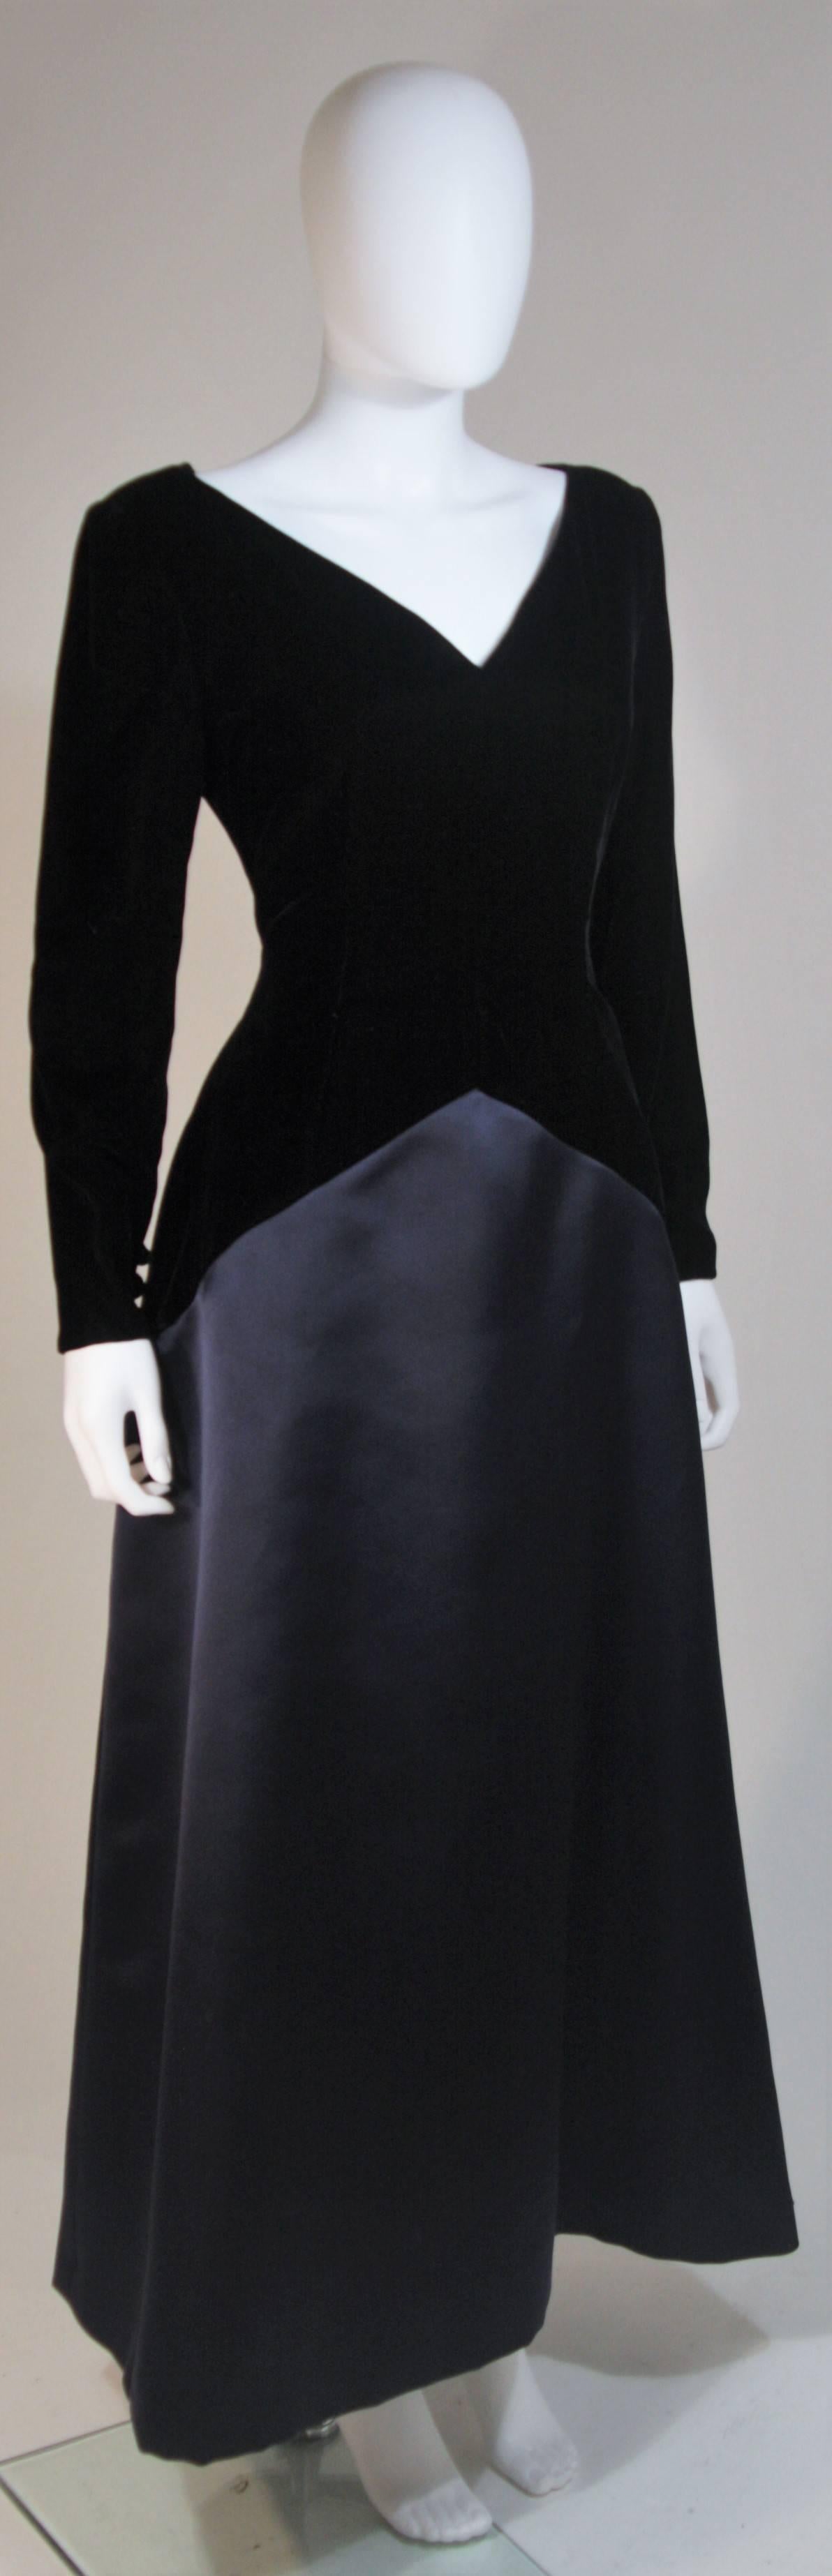 BILL BLASS Circa 1980's-1990's Velvet and Navy Satin Contrast Gown Size 12 In Excellent Condition For Sale In Los Angeles, CA